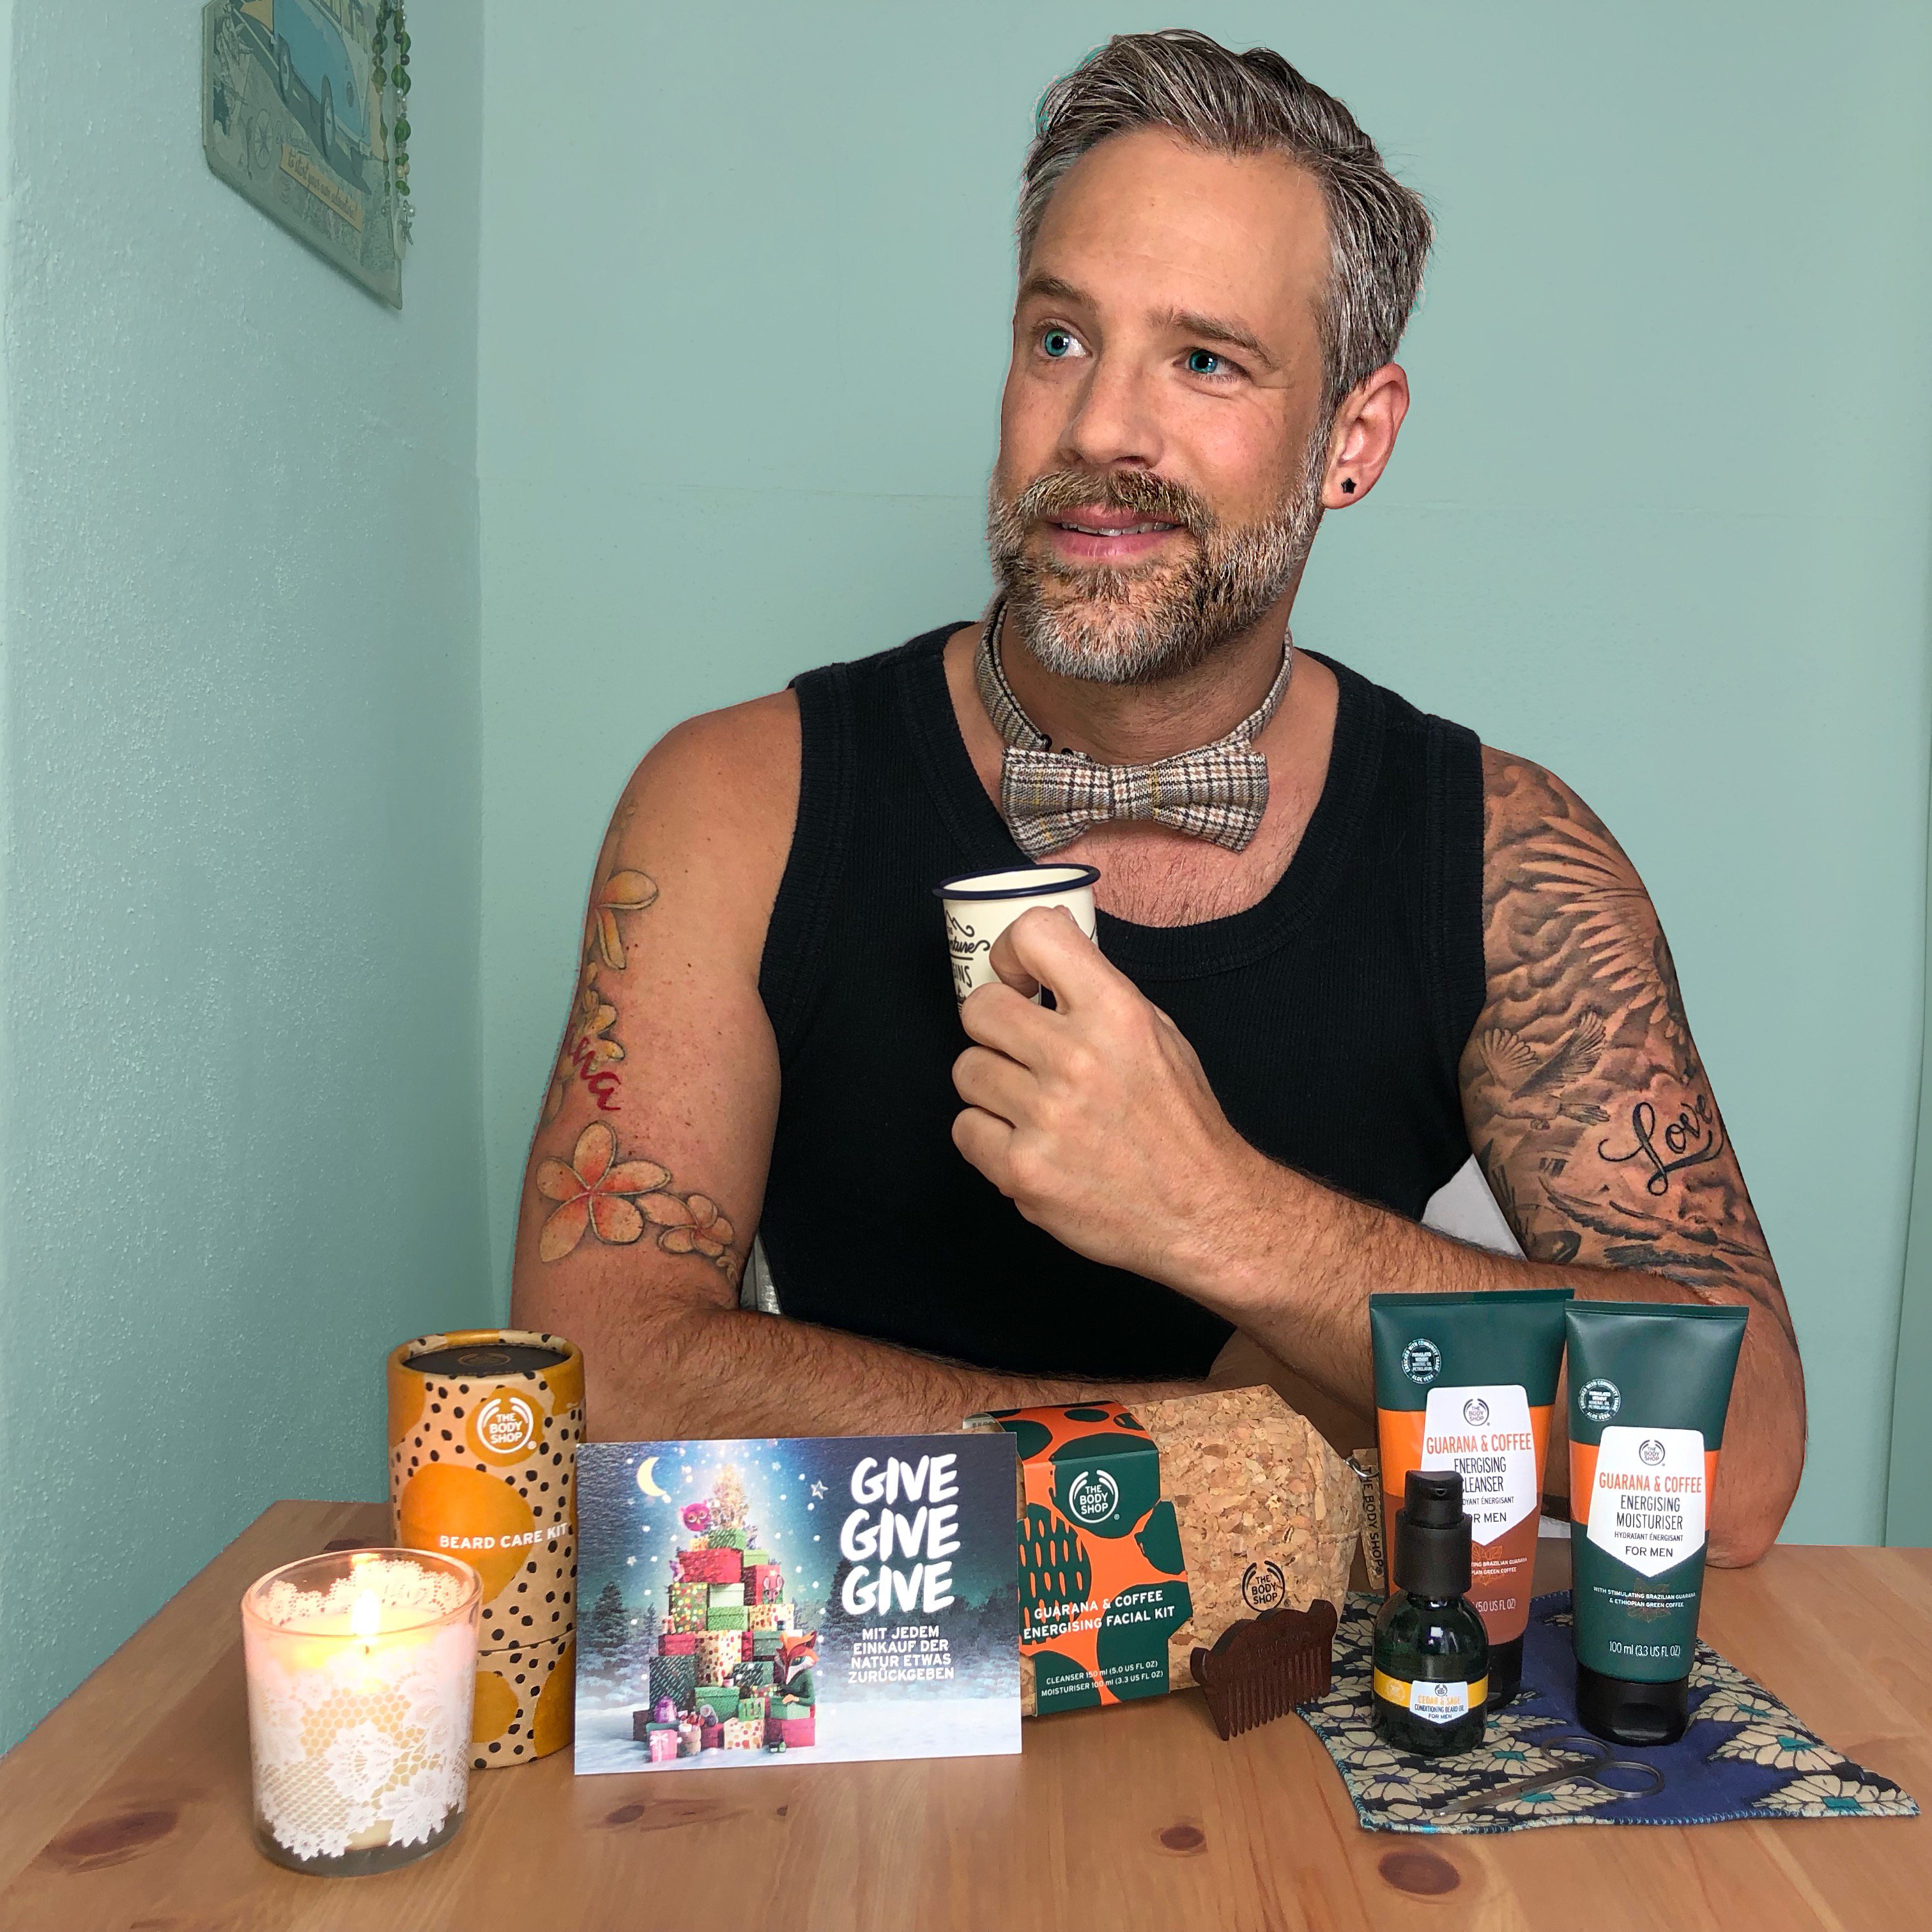 Michael Walter on X:  Good morning!⠀ Is it  Christmas yet? 🎁 ⠀ Wonderful presents for men at The Body Shop. Beard Care  Kit and Guarana & Coffee Energising Facial Kit are